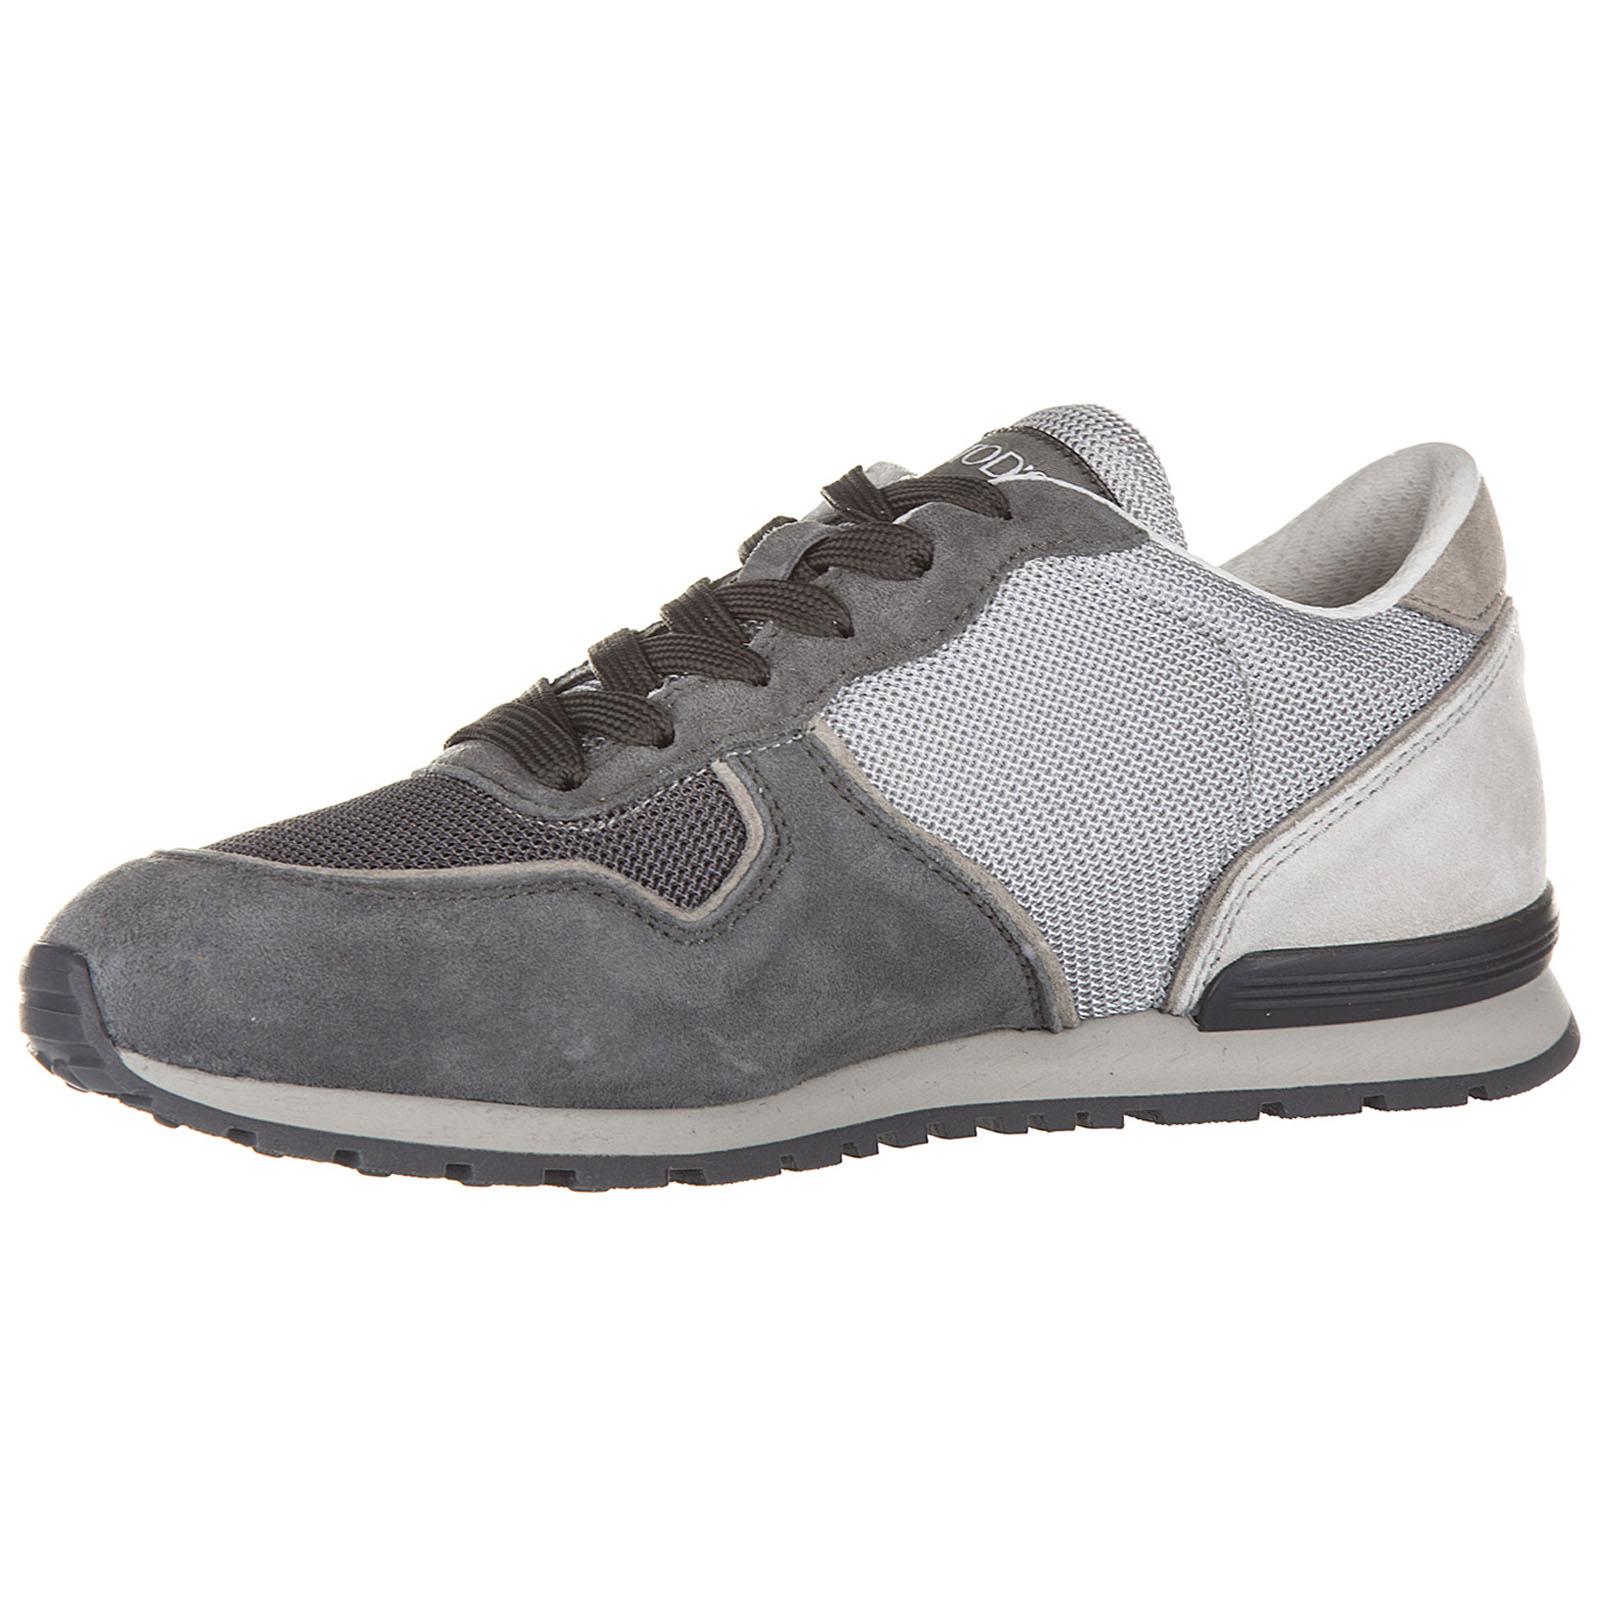 Tod's Shoes Suede Trainers Sneakers Allacciato Active Sportivo in 